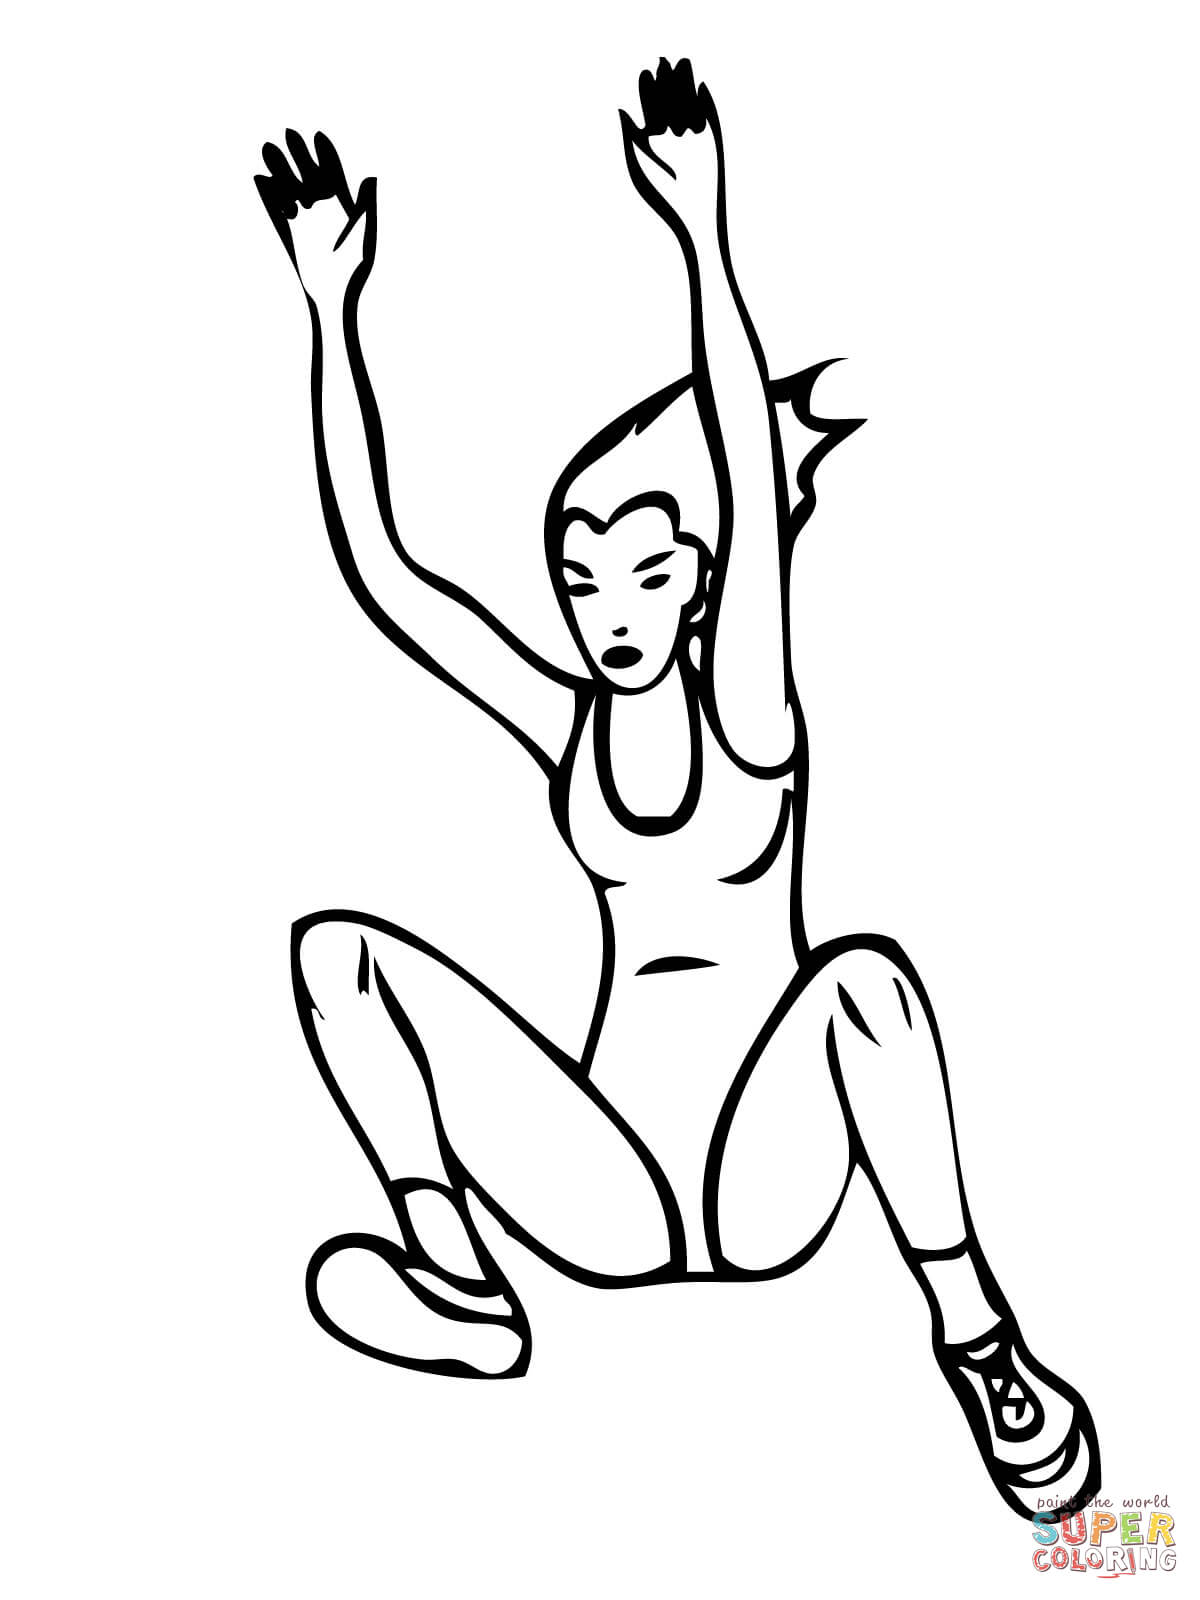 Athletics coloring pages | Free Coloring Pages